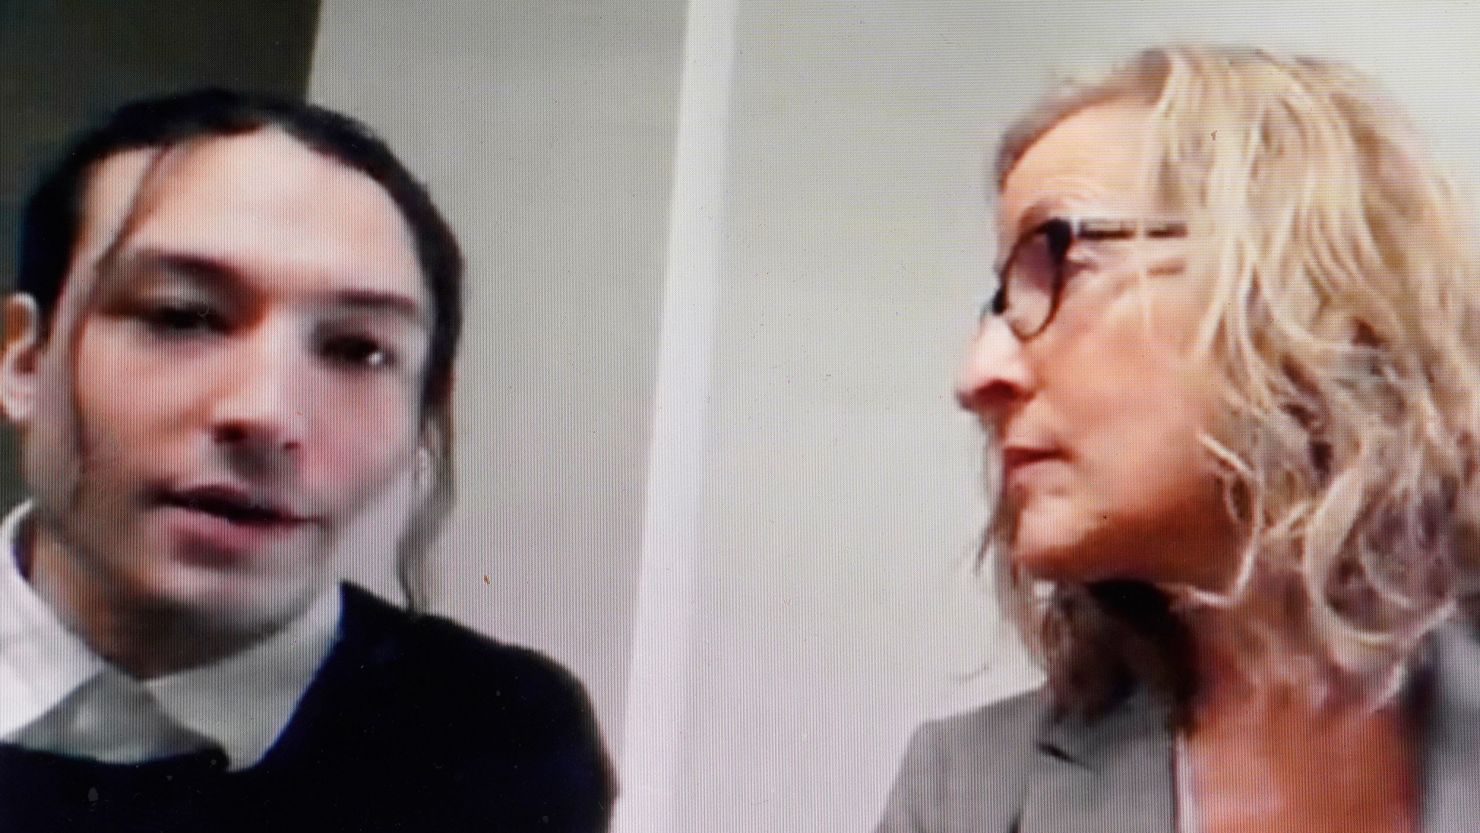 Actor Ezra Miller, left, is seated with attorney Lisa Shelkrot, right, as they appear Monday, Oct. 17, 2022, in a livestream video remotely from Burlington, Vt., during Miller's arraignment at superior court, in Bennington, Vt. Miller has pleaded not guilty to stealing bottles of liquor from a neighbor's home in Vermont. (AP Photo/Steven Senne)